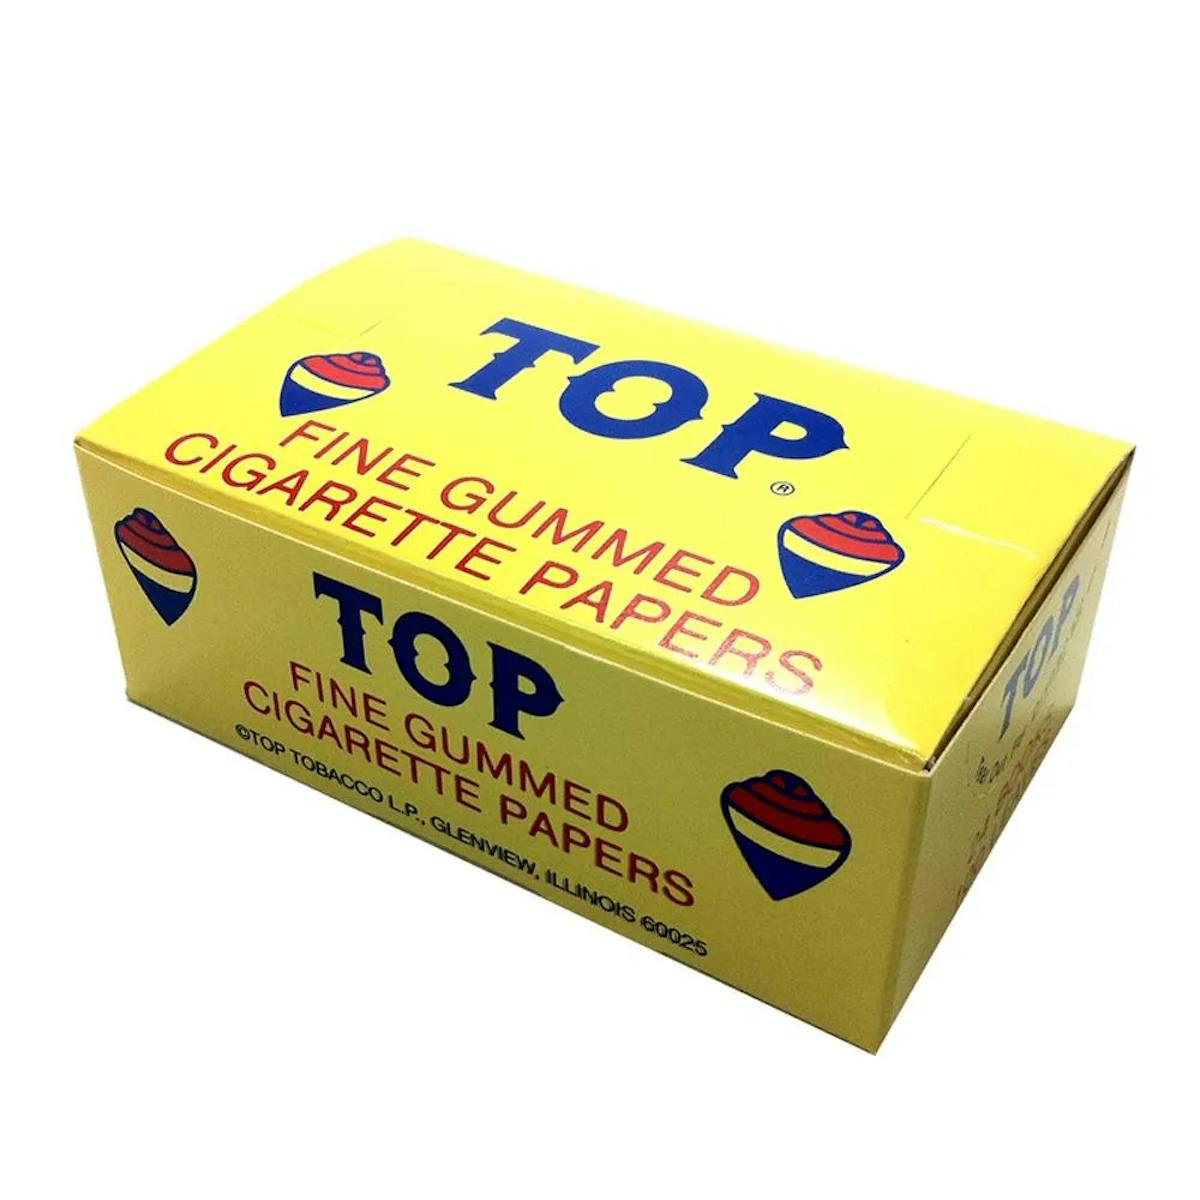 Image of Top Gummed Rolling Papers